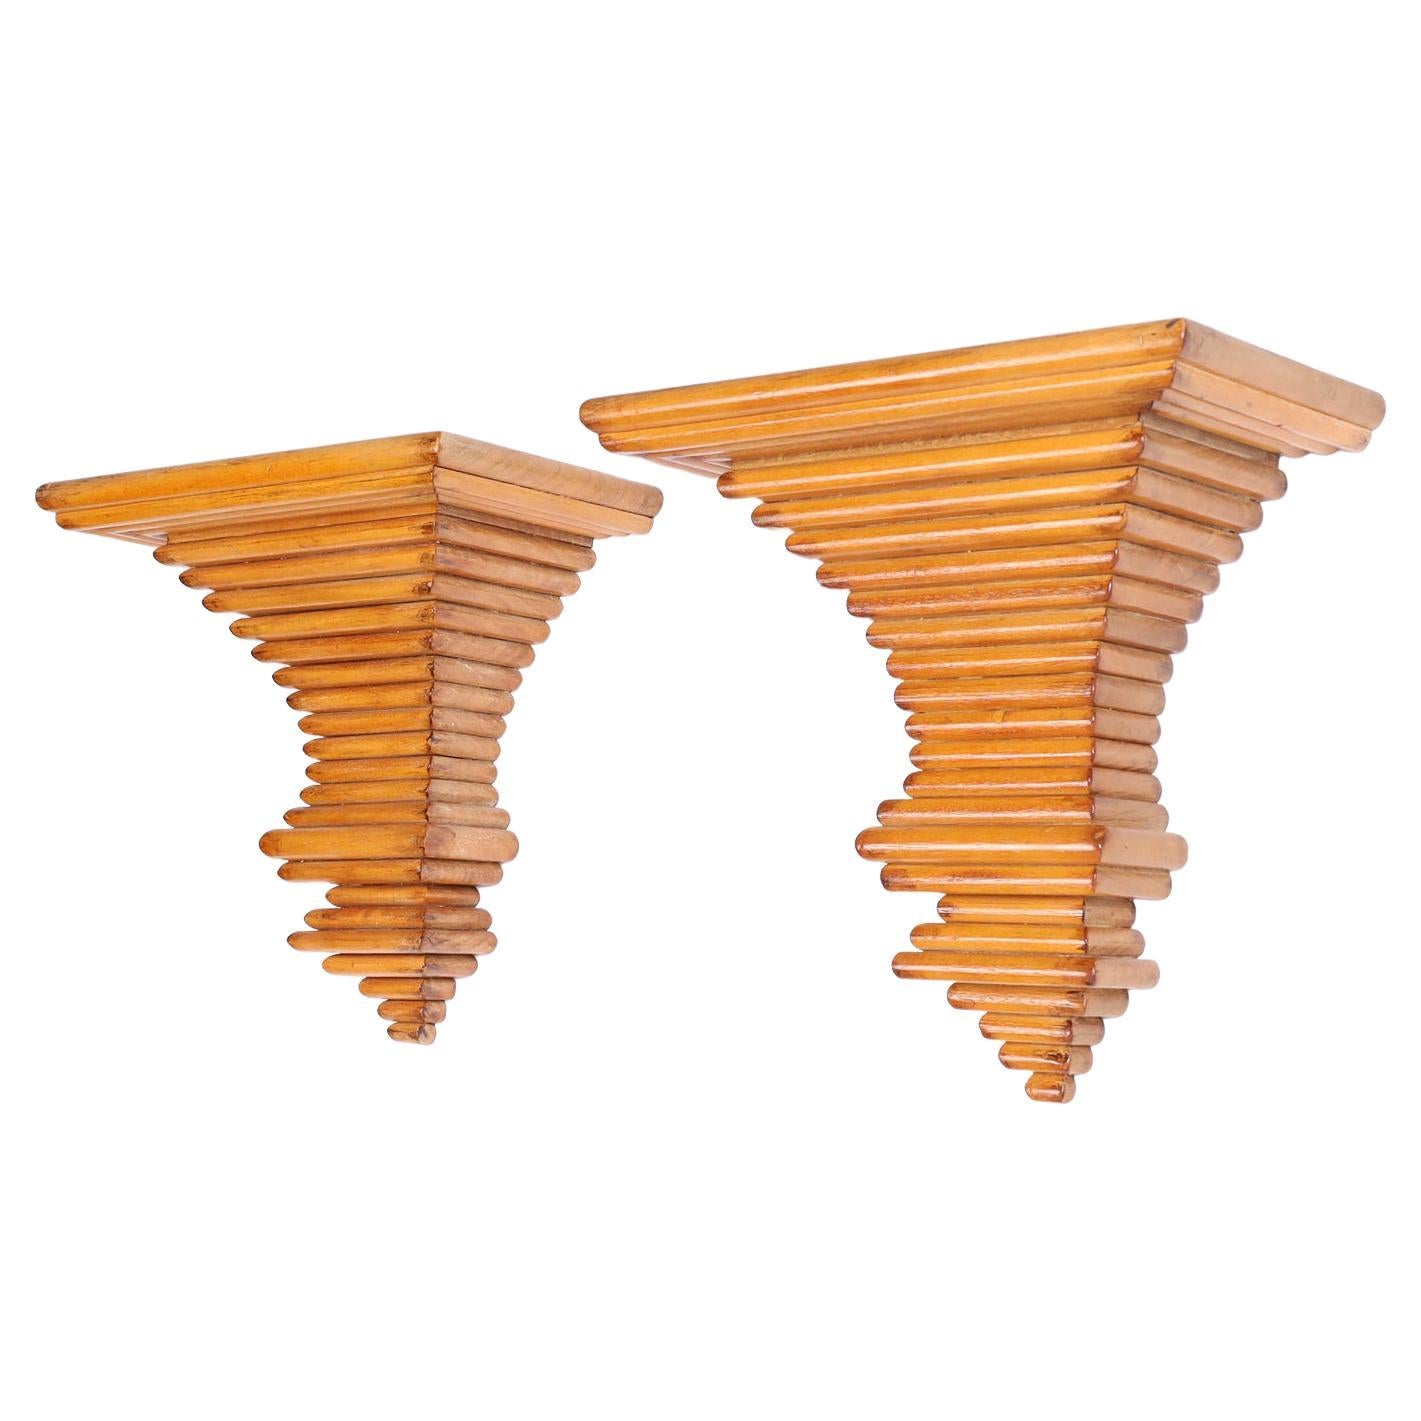 Pair of Italian Wood Architectural Wall Brackets